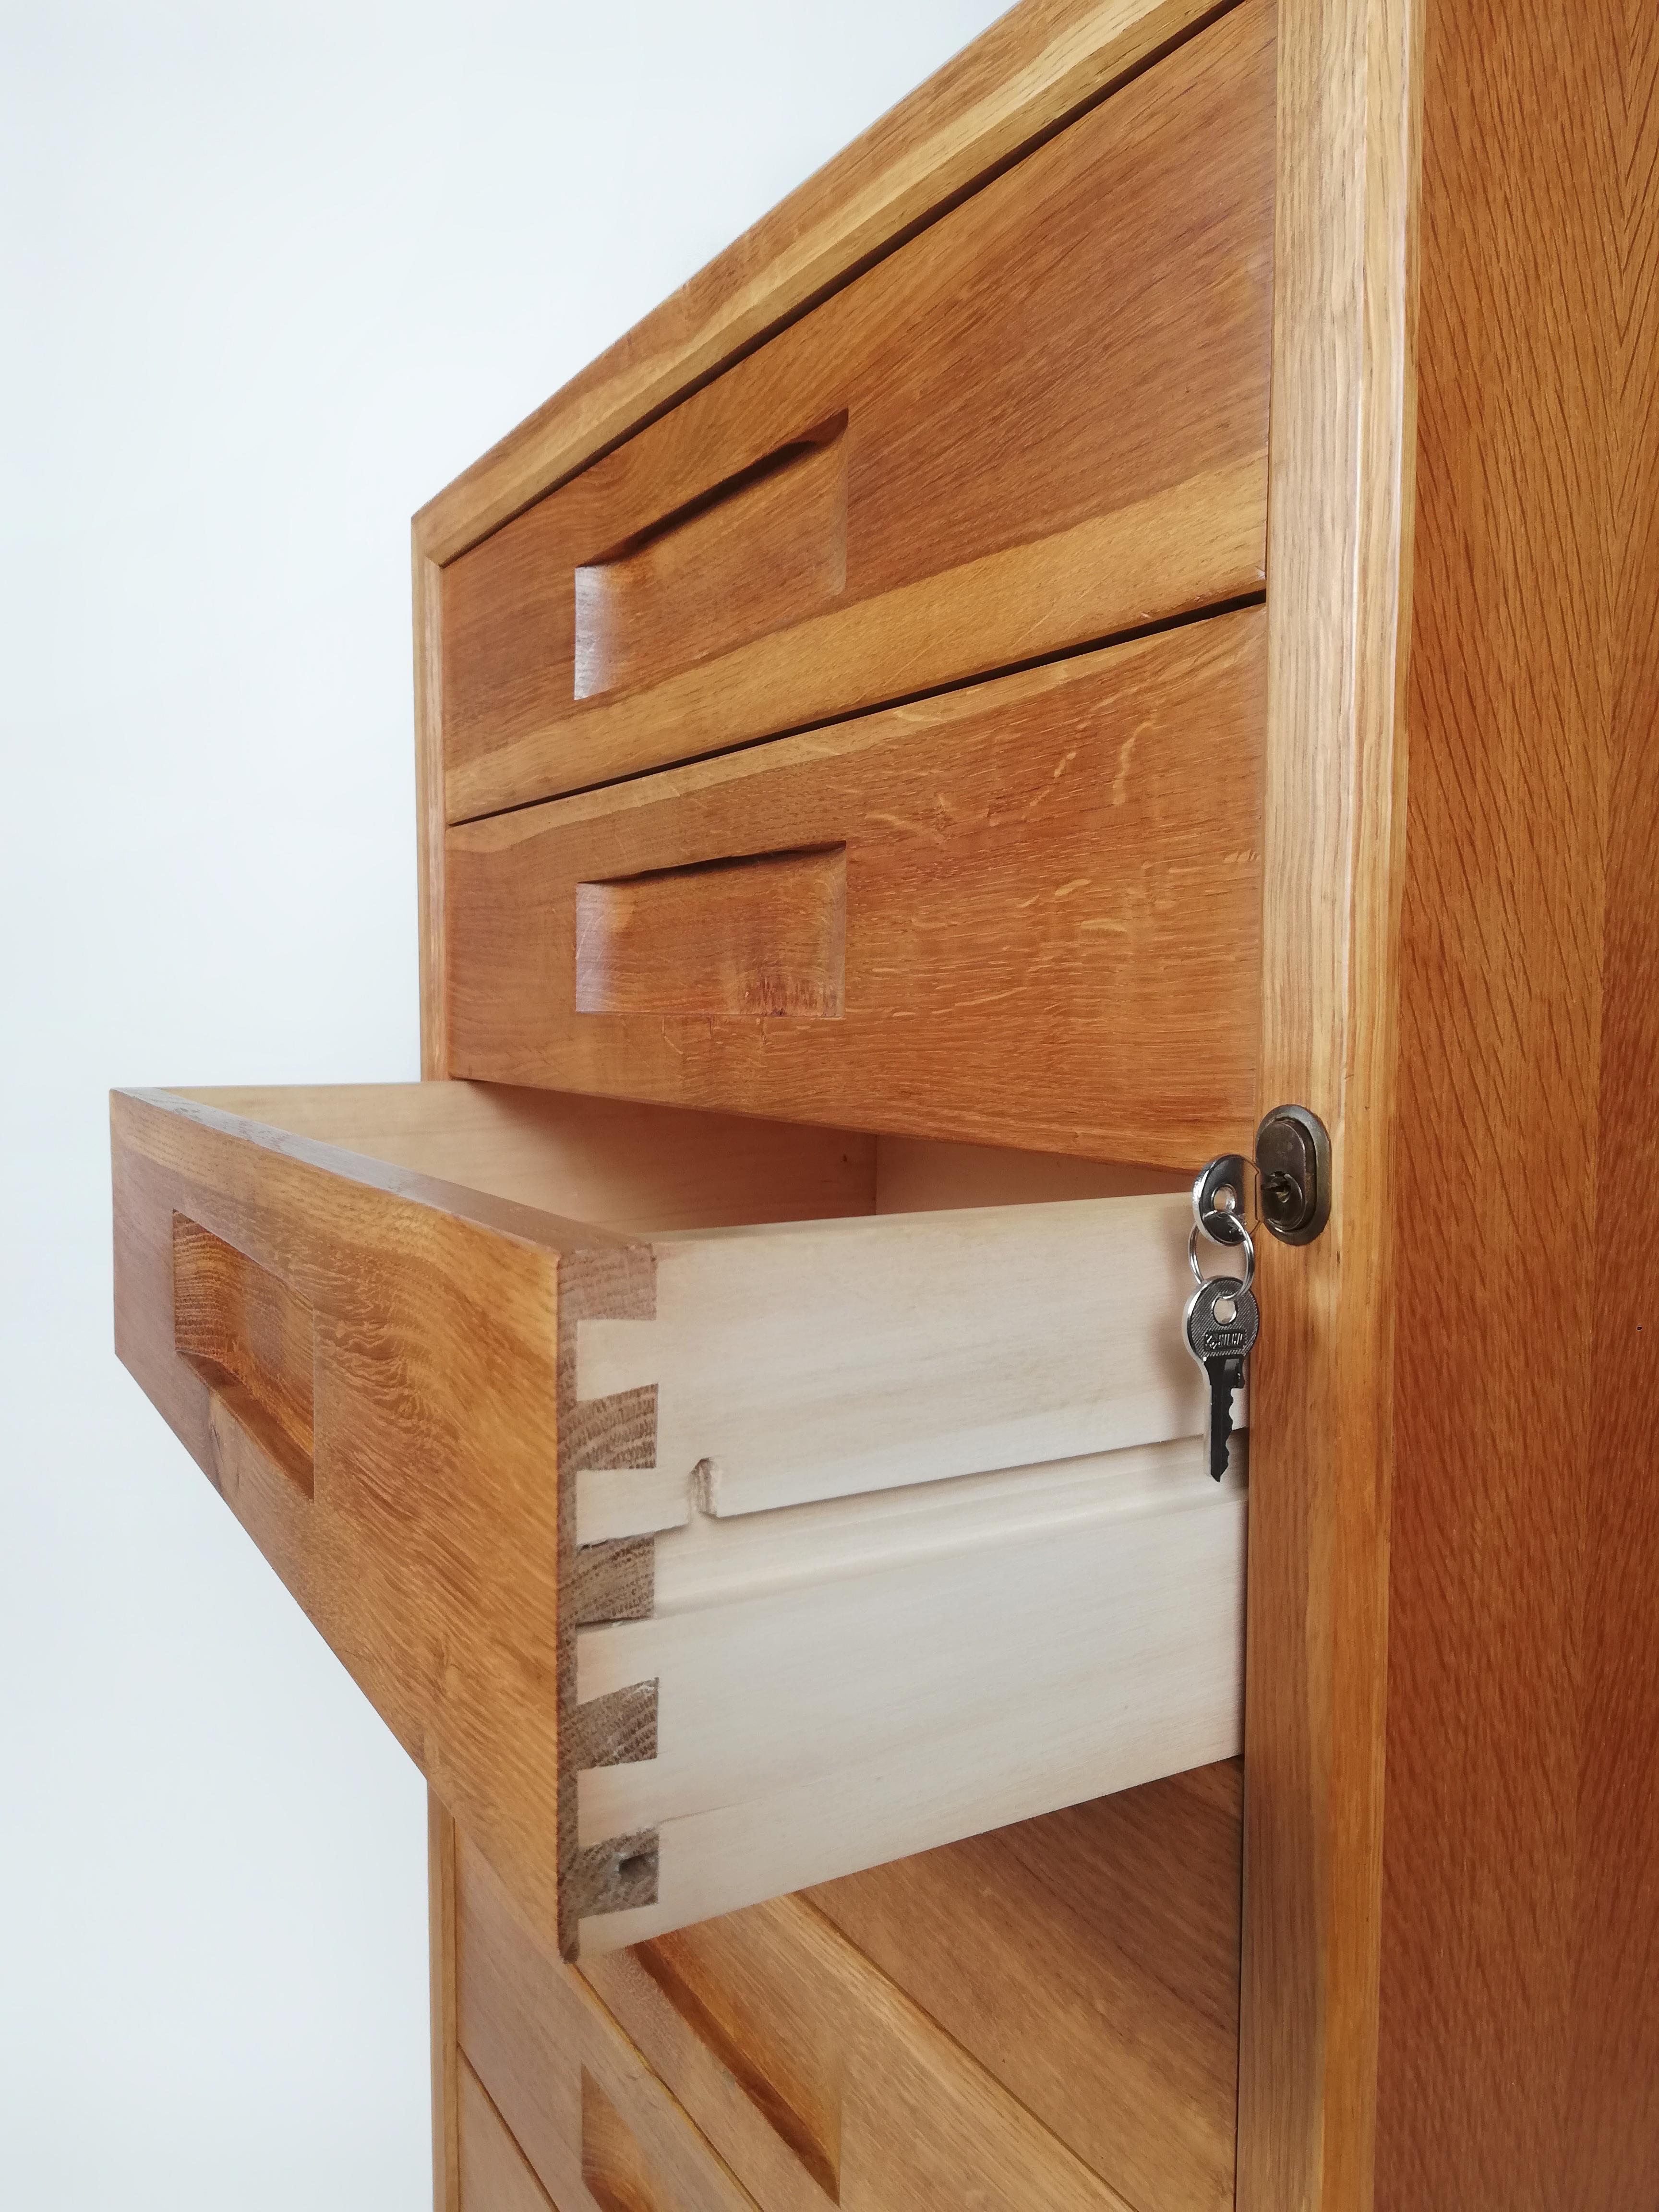 Italian Vintage Oak and Birch Wood Office Tallboy Chest of Drawers, 1960s For Sale 6